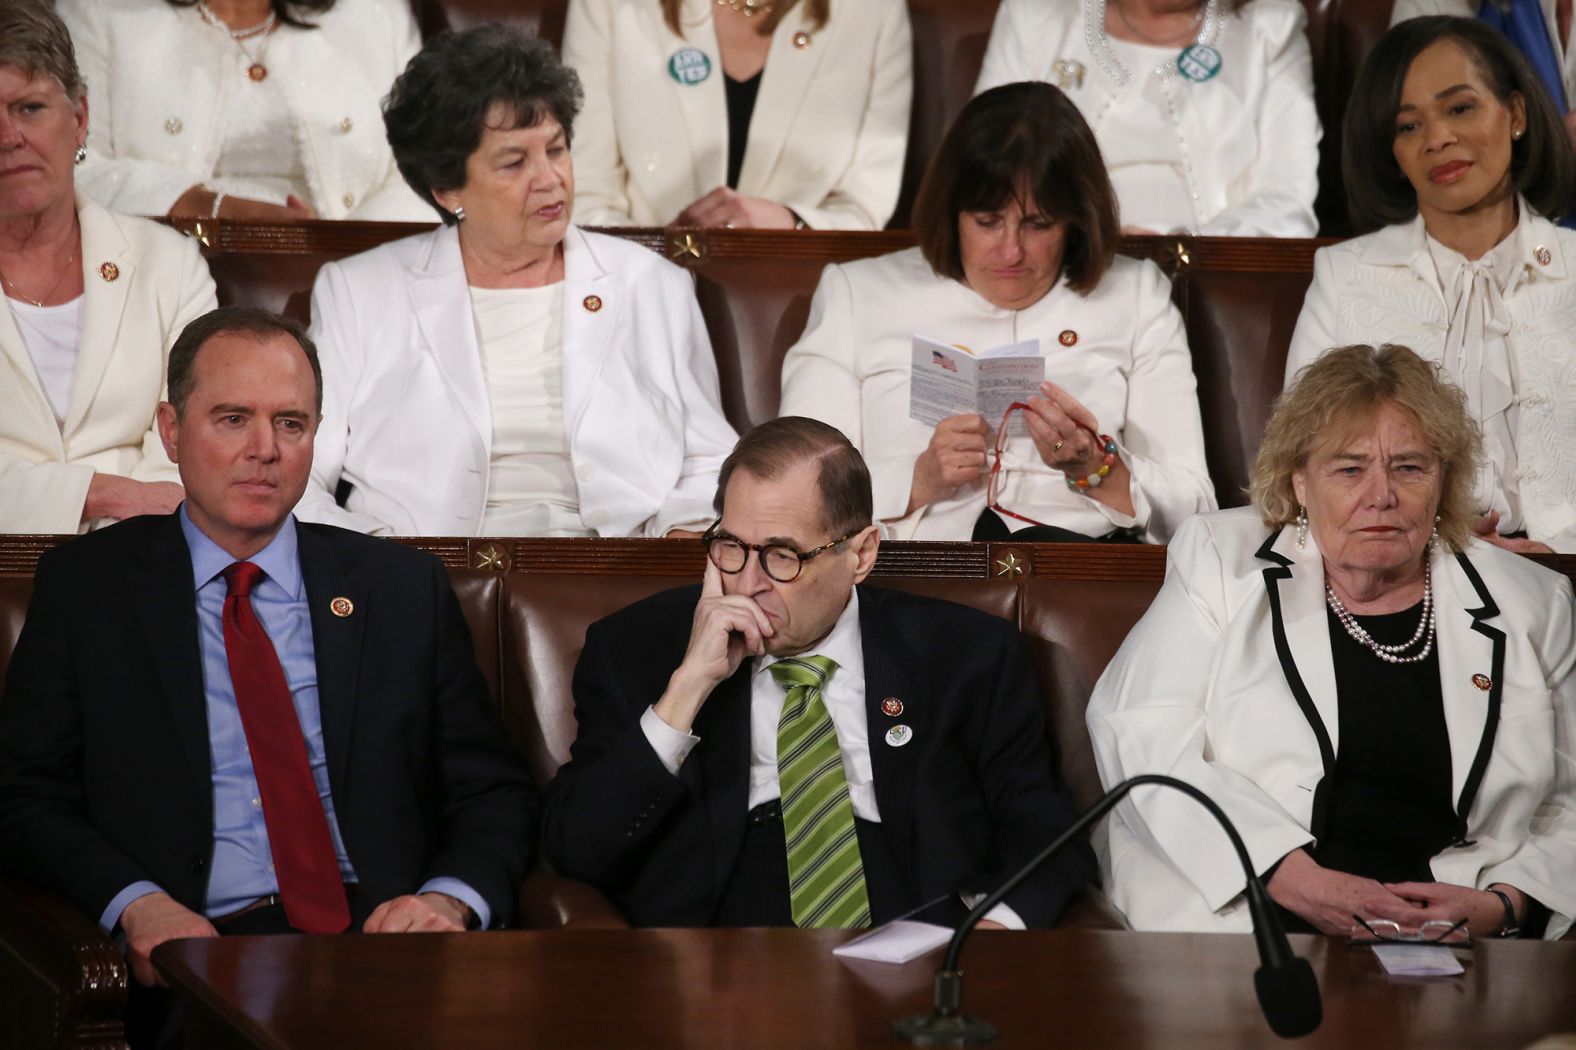 House impeachment managers -— from left, Reps. Adam Schiff, Jerry Nadler and Zoe Lofgren — sit together during the speech.